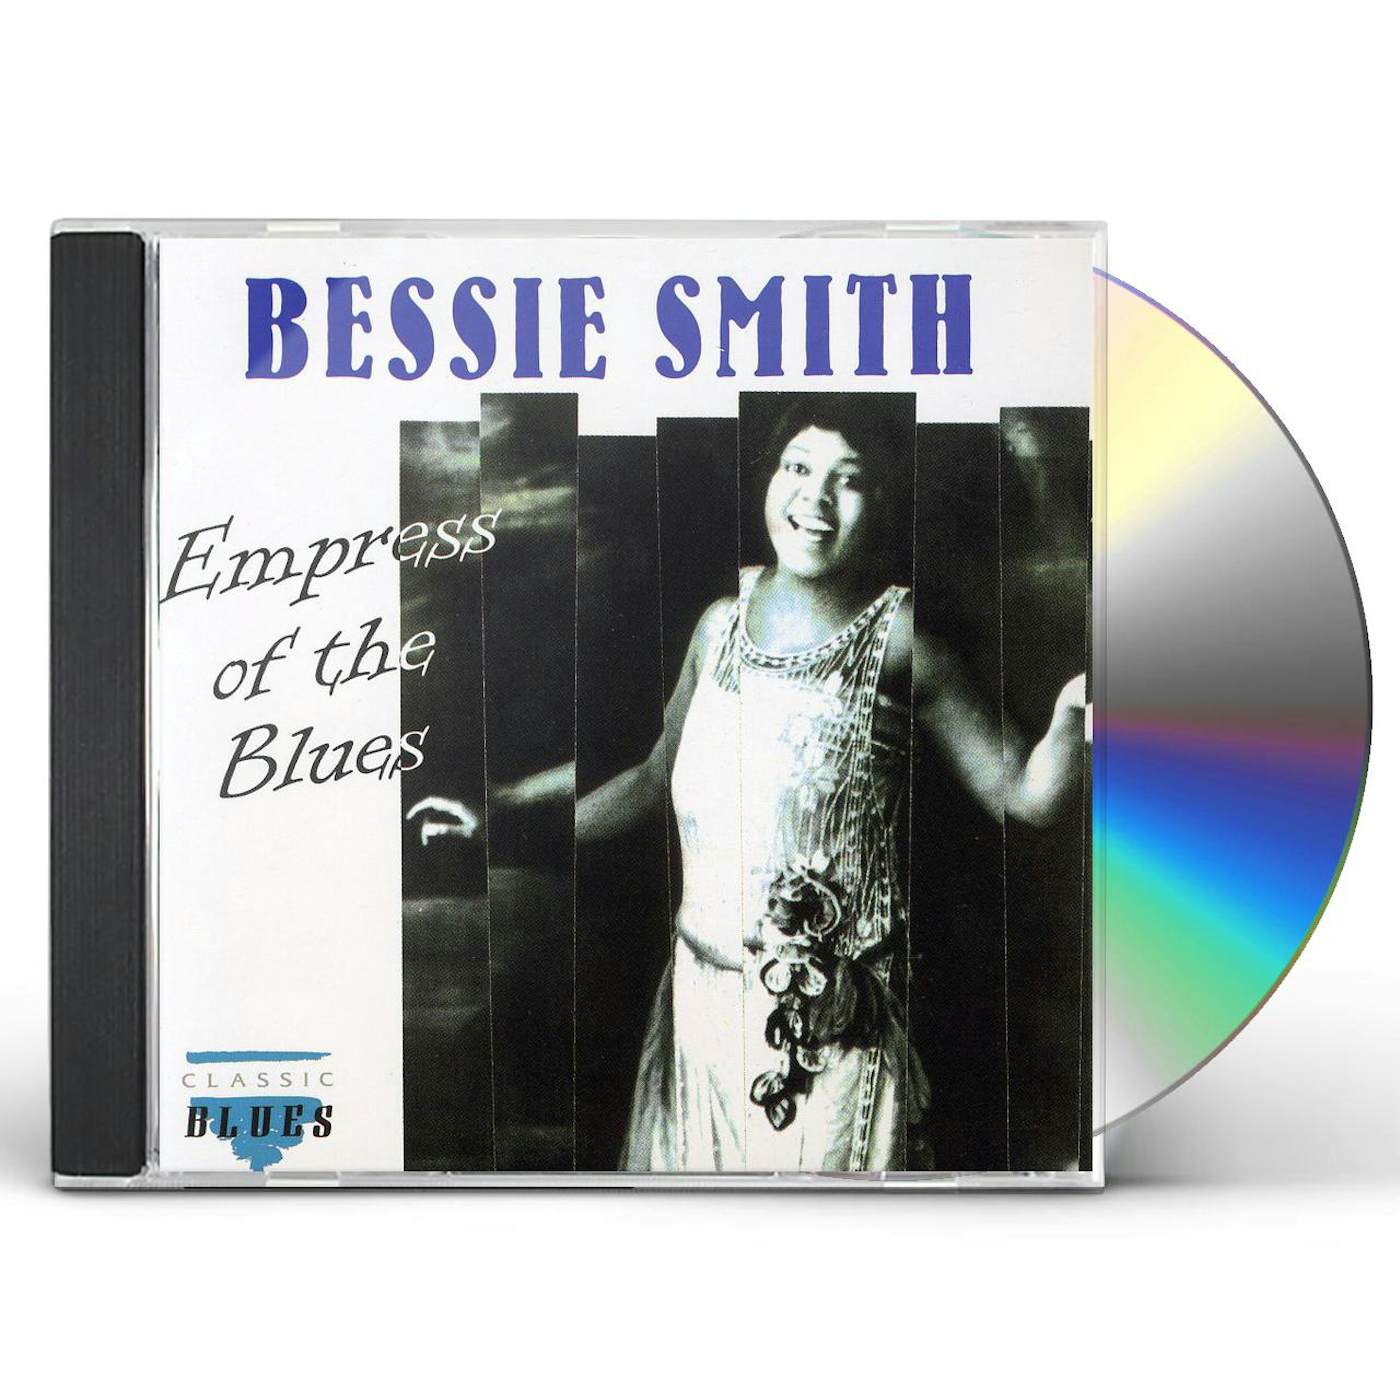 Bessie Smith EMPRESS OF THE BLUES CD